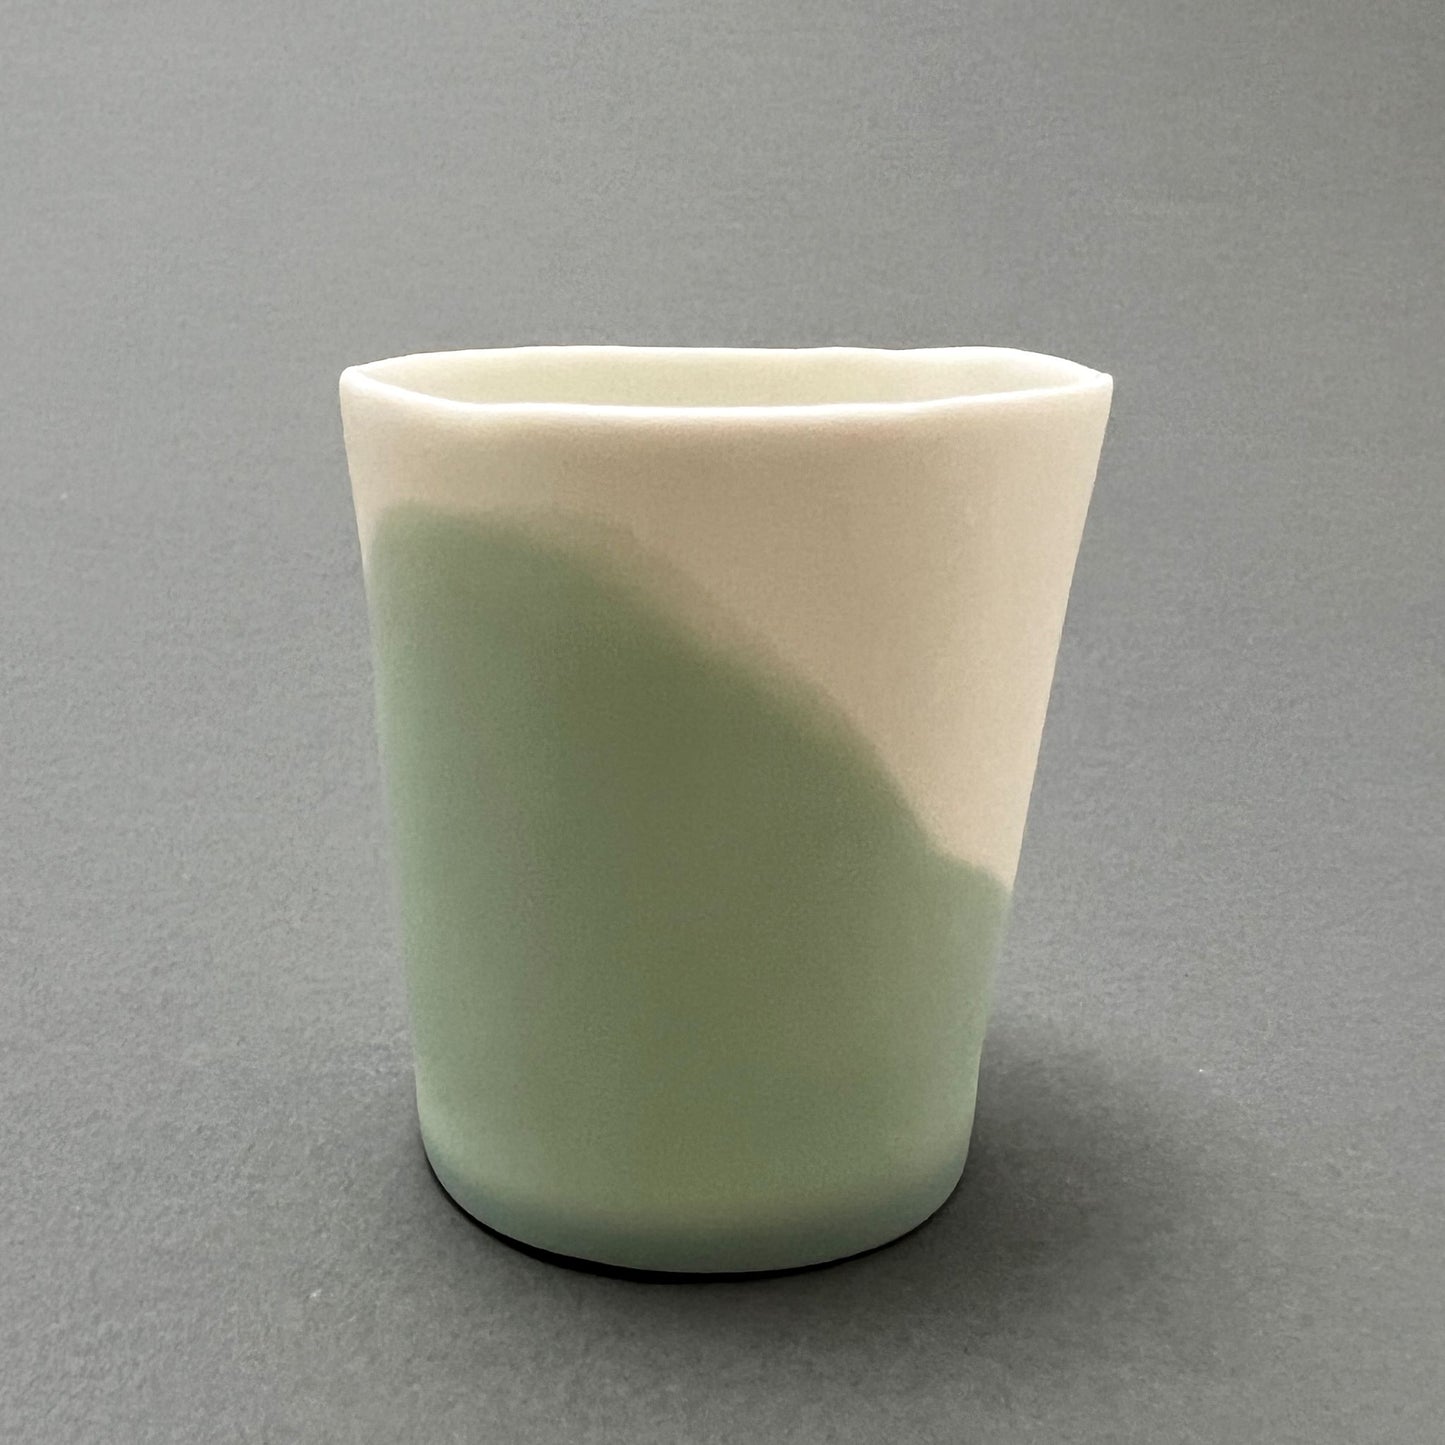 A small aqua blue and white colored porcelain cup standing on a gray background